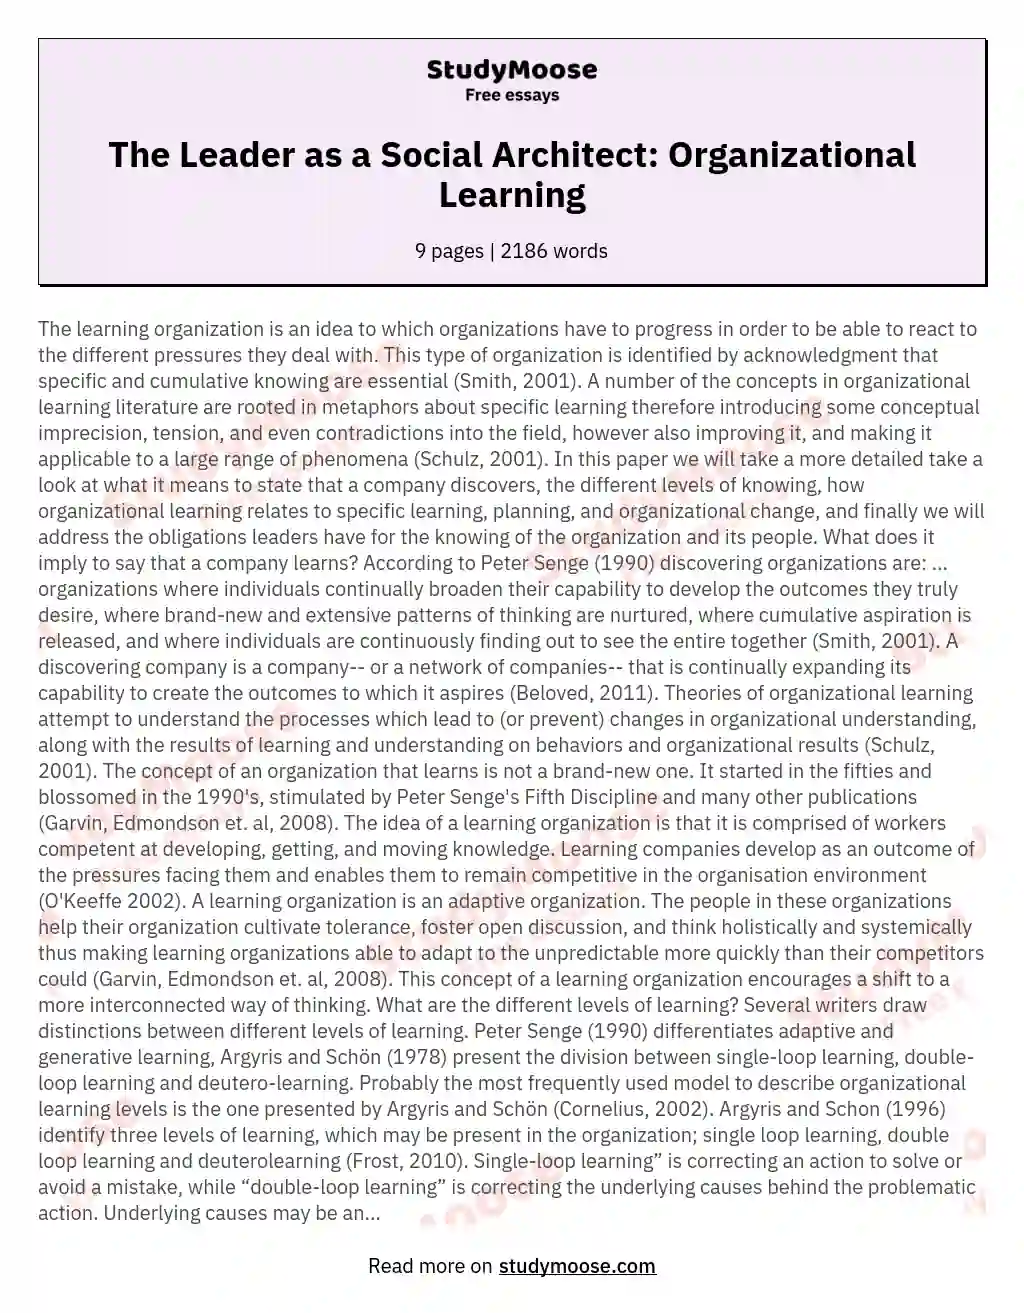 The Leader as a Social Architect: Organizational Learning